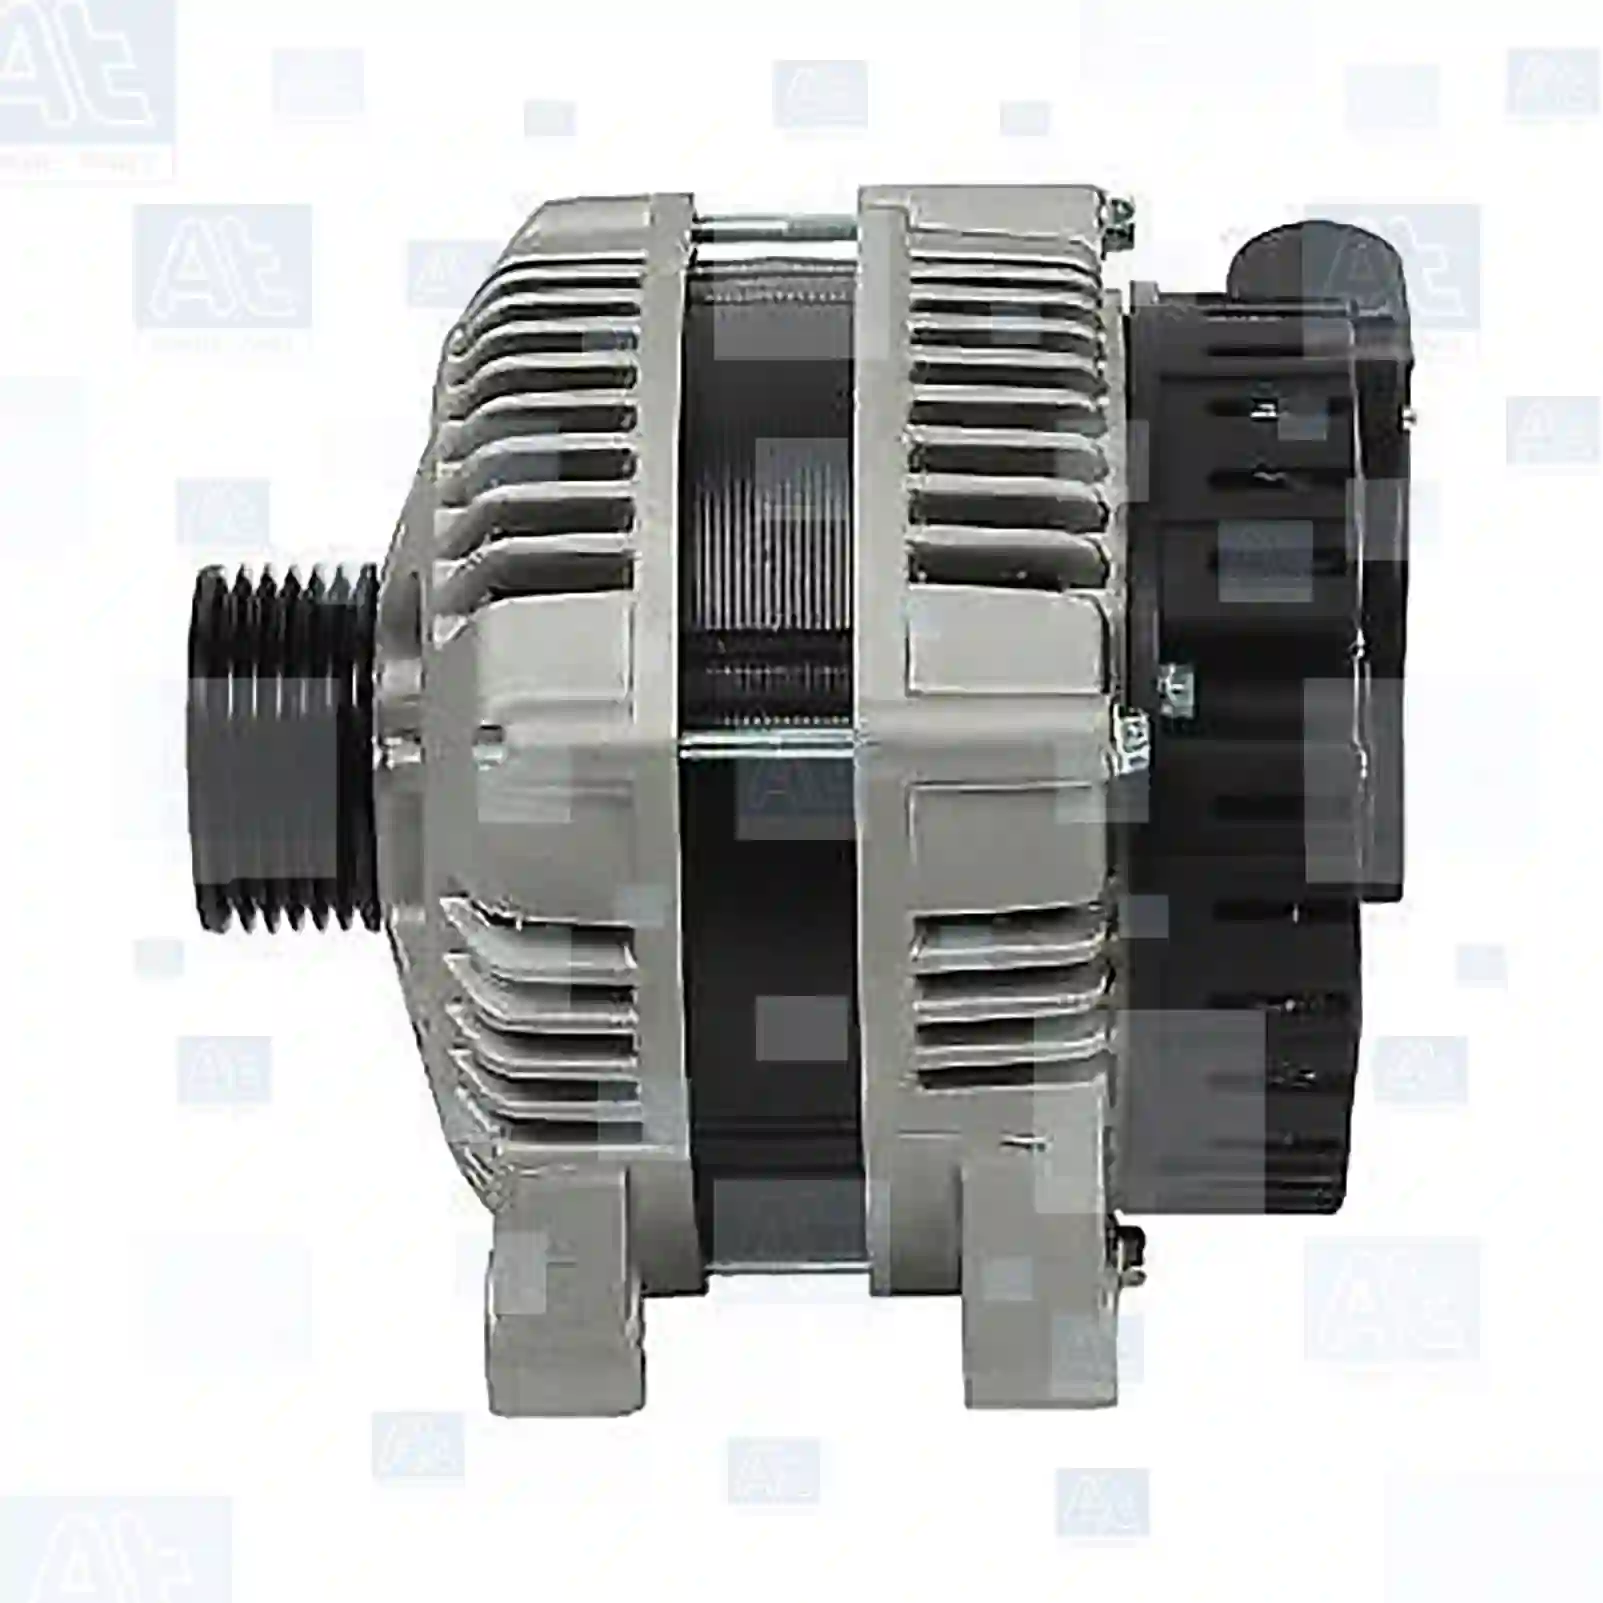 Alternator, at no 77711559, oem no: 57052F, 57054F, 57055H, 57055J, 5705GC, 9335342080, 9467560280, 9621791480, 9635342080, 9639362380, 9645907780, 9645907880, 1516481, 71716671, 71719943, 9621791480, 71716671, 71719943, 9467560280, 9621791480, 71716671, 71719943, 9621791480, SA180, 57052F, 57054F, 57055H, 57055J, 5705GC, 9335342080, 9467560280, 9621791480, 9635342080, 9639362380, 9645907780, 9645907880 At Spare Part | Engine, Accelerator Pedal, Camshaft, Connecting Rod, Crankcase, Crankshaft, Cylinder Head, Engine Suspension Mountings, Exhaust Manifold, Exhaust Gas Recirculation, Filter Kits, Flywheel Housing, General Overhaul Kits, Engine, Intake Manifold, Oil Cleaner, Oil Cooler, Oil Filter, Oil Pump, Oil Sump, Piston & Liner, Sensor & Switch, Timing Case, Turbocharger, Cooling System, Belt Tensioner, Coolant Filter, Coolant Pipe, Corrosion Prevention Agent, Drive, Expansion Tank, Fan, Intercooler, Monitors & Gauges, Radiator, Thermostat, V-Belt / Timing belt, Water Pump, Fuel System, Electronical Injector Unit, Feed Pump, Fuel Filter, cpl., Fuel Gauge Sender,  Fuel Line, Fuel Pump, Fuel Tank, Injection Line Kit, Injection Pump, Exhaust System, Clutch & Pedal, Gearbox, Propeller Shaft, Axles, Brake System, Hubs & Wheels, Suspension, Leaf Spring, Universal Parts / Accessories, Steering, Electrical System, Cabin Alternator, at no 77711559, oem no: 57052F, 57054F, 57055H, 57055J, 5705GC, 9335342080, 9467560280, 9621791480, 9635342080, 9639362380, 9645907780, 9645907880, 1516481, 71716671, 71719943, 9621791480, 71716671, 71719943, 9467560280, 9621791480, 71716671, 71719943, 9621791480, SA180, 57052F, 57054F, 57055H, 57055J, 5705GC, 9335342080, 9467560280, 9621791480, 9635342080, 9639362380, 9645907780, 9645907880 At Spare Part | Engine, Accelerator Pedal, Camshaft, Connecting Rod, Crankcase, Crankshaft, Cylinder Head, Engine Suspension Mountings, Exhaust Manifold, Exhaust Gas Recirculation, Filter Kits, Flywheel Housing, General Overhaul Kits, Engine, Intake Manifold, Oil Cleaner, Oil Cooler, Oil Filter, Oil Pump, Oil Sump, Piston & Liner, Sensor & Switch, Timing Case, Turbocharger, Cooling System, Belt Tensioner, Coolant Filter, Coolant Pipe, Corrosion Prevention Agent, Drive, Expansion Tank, Fan, Intercooler, Monitors & Gauges, Radiator, Thermostat, V-Belt / Timing belt, Water Pump, Fuel System, Electronical Injector Unit, Feed Pump, Fuel Filter, cpl., Fuel Gauge Sender,  Fuel Line, Fuel Pump, Fuel Tank, Injection Line Kit, Injection Pump, Exhaust System, Clutch & Pedal, Gearbox, Propeller Shaft, Axles, Brake System, Hubs & Wheels, Suspension, Leaf Spring, Universal Parts / Accessories, Steering, Electrical System, Cabin